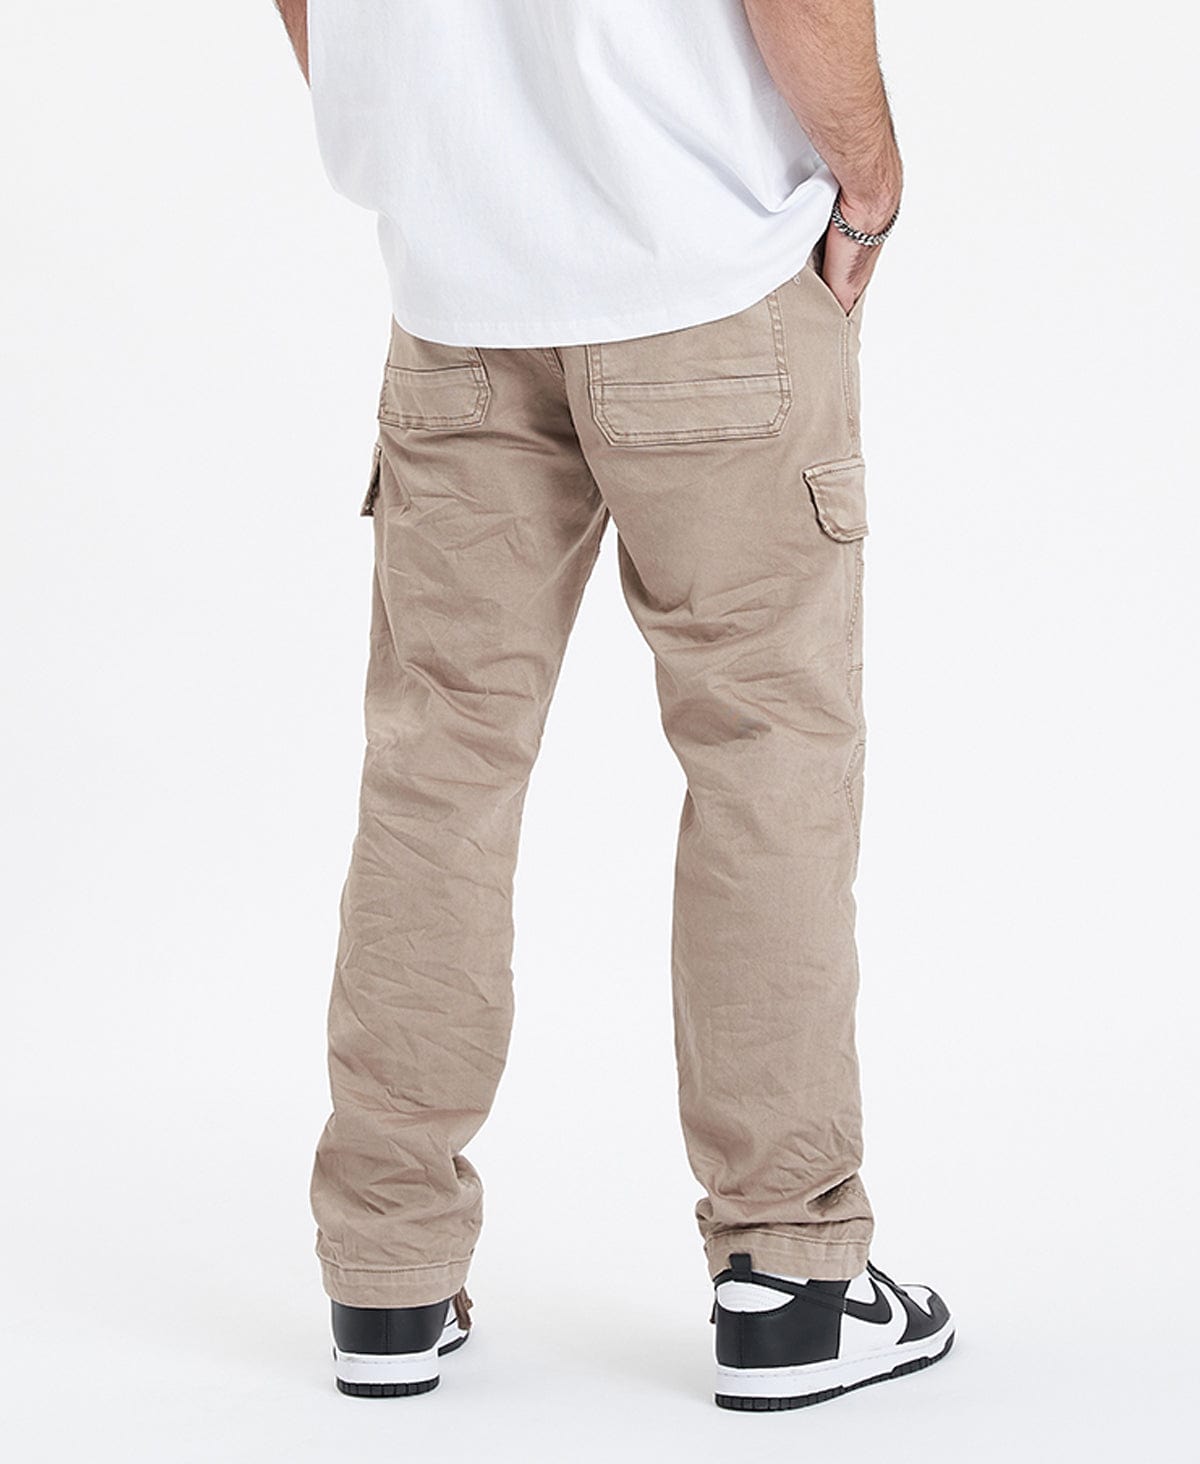 Men's Lycra Cargo Pant with Double Pocket in Black